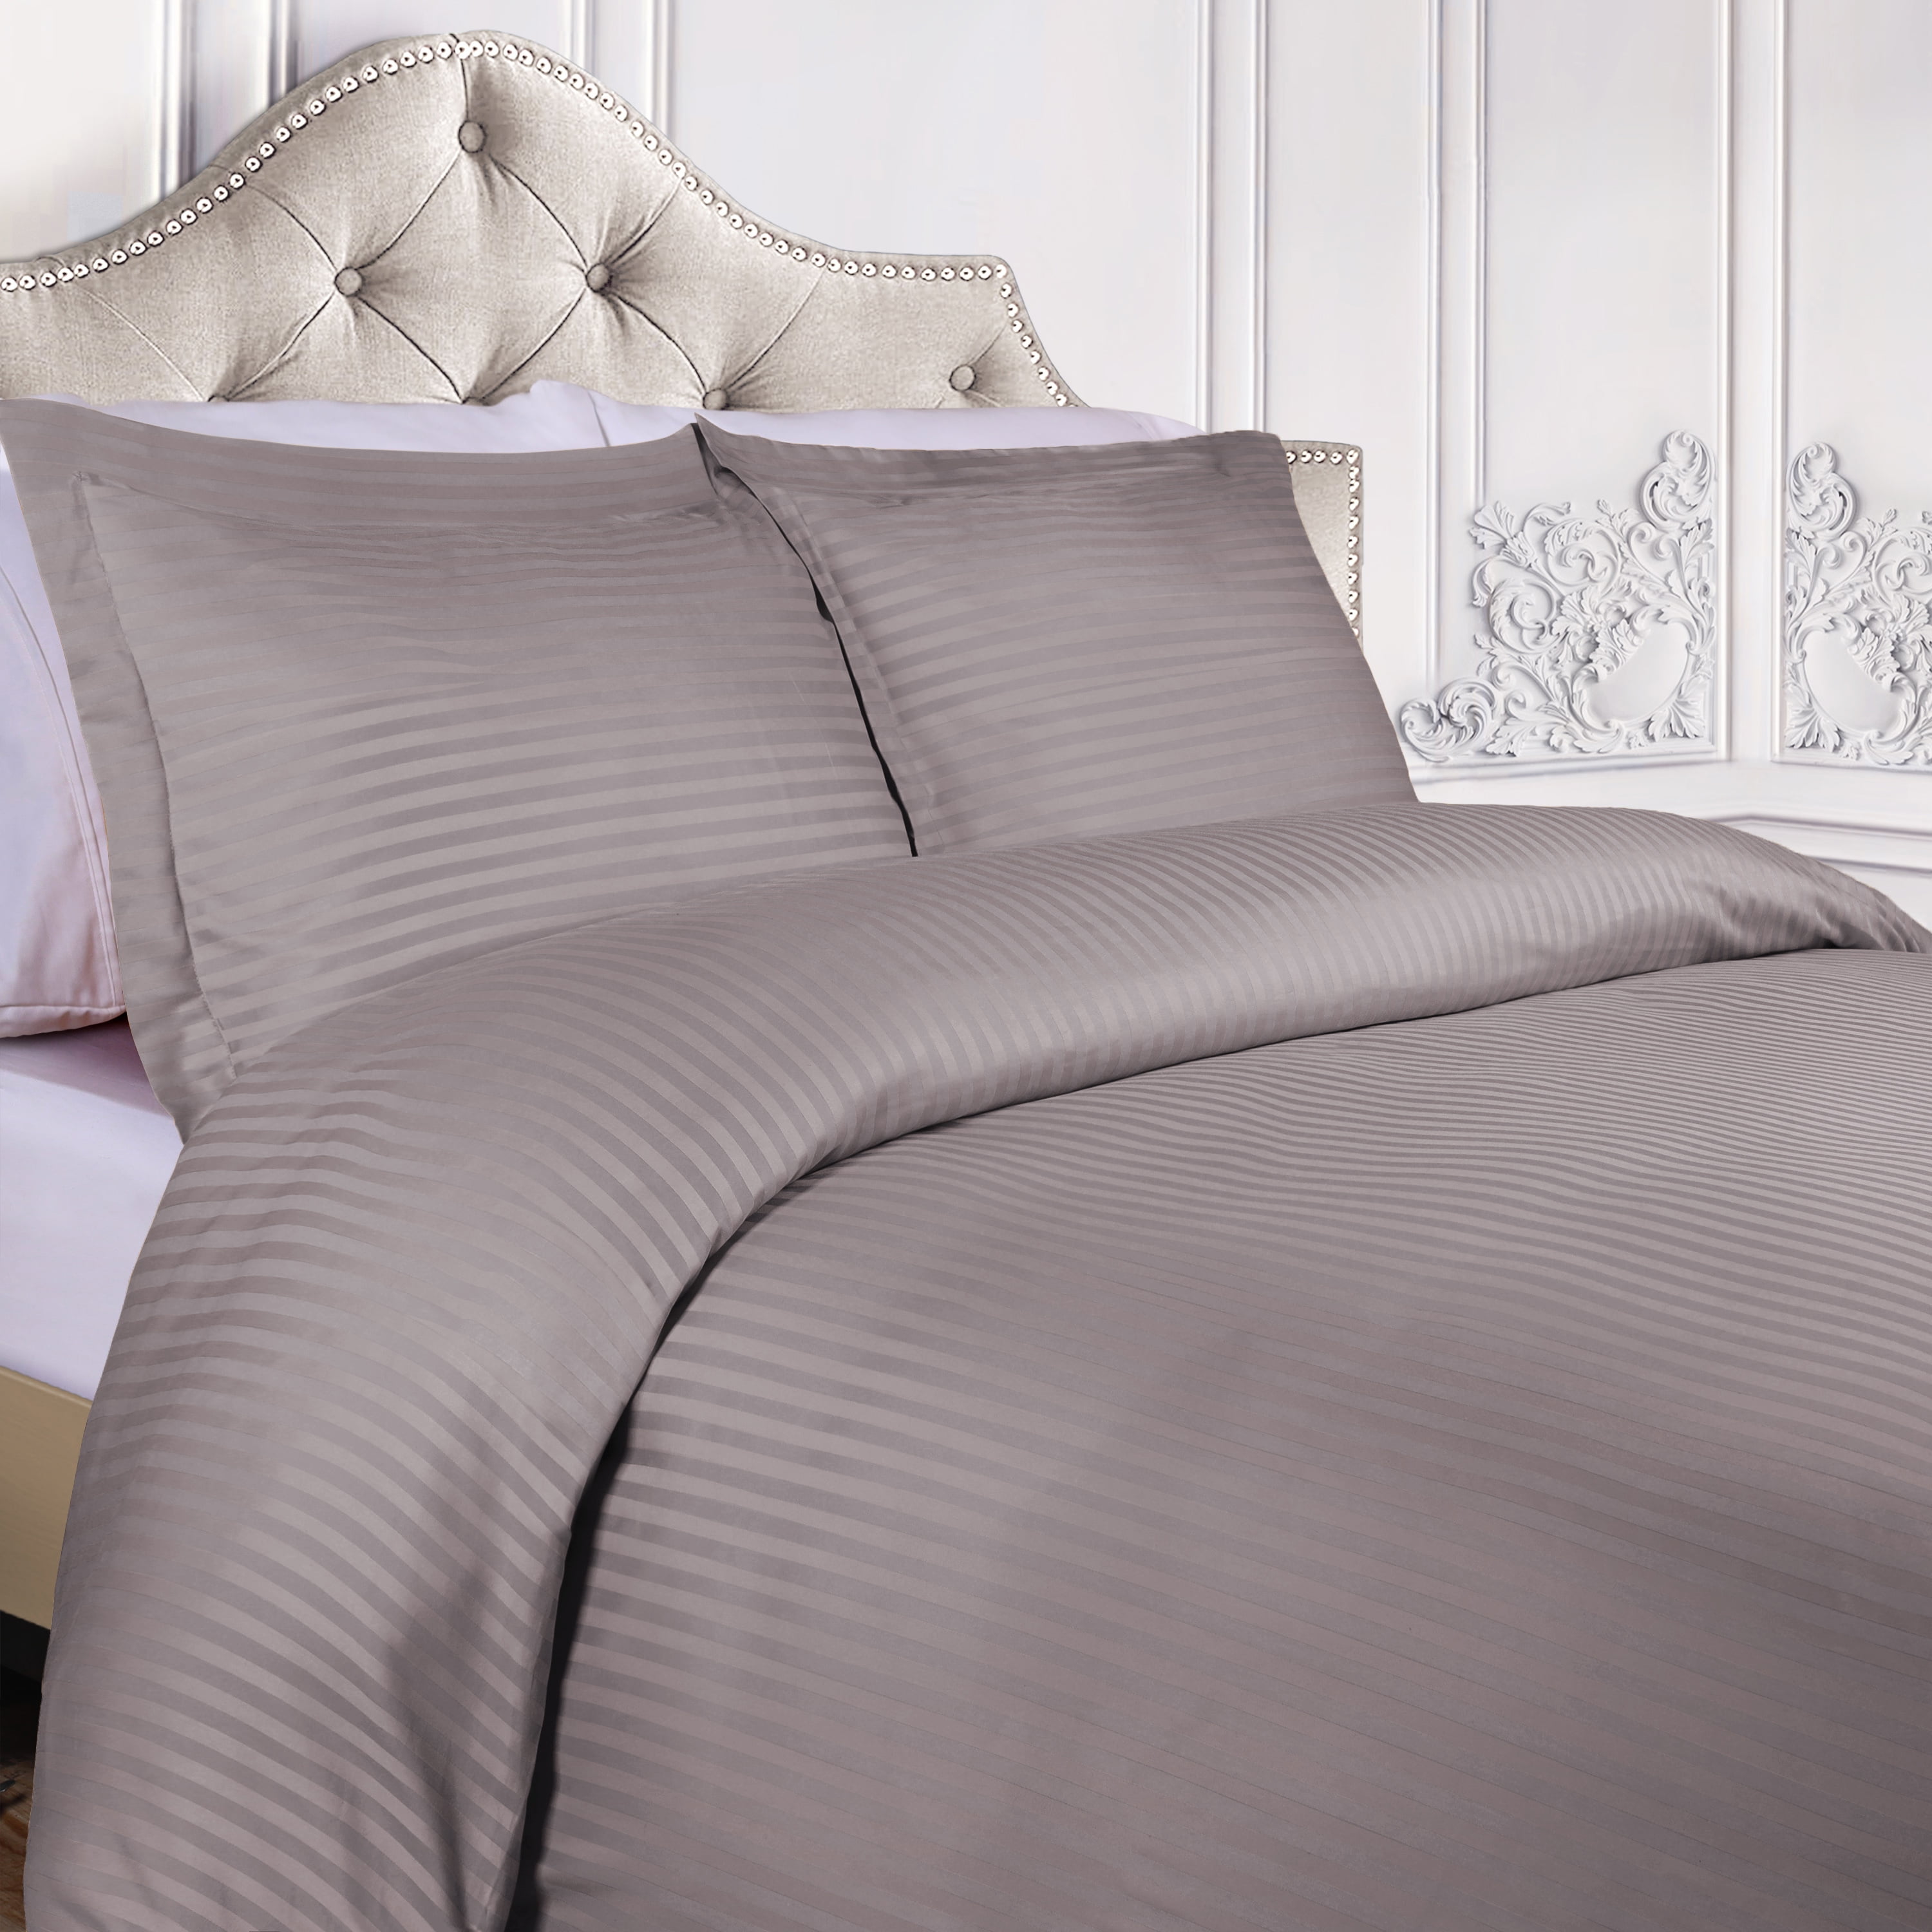 500 Thread Cotton Rich Sateen Bed Linen Platinum Grey All Variations and Sizes 